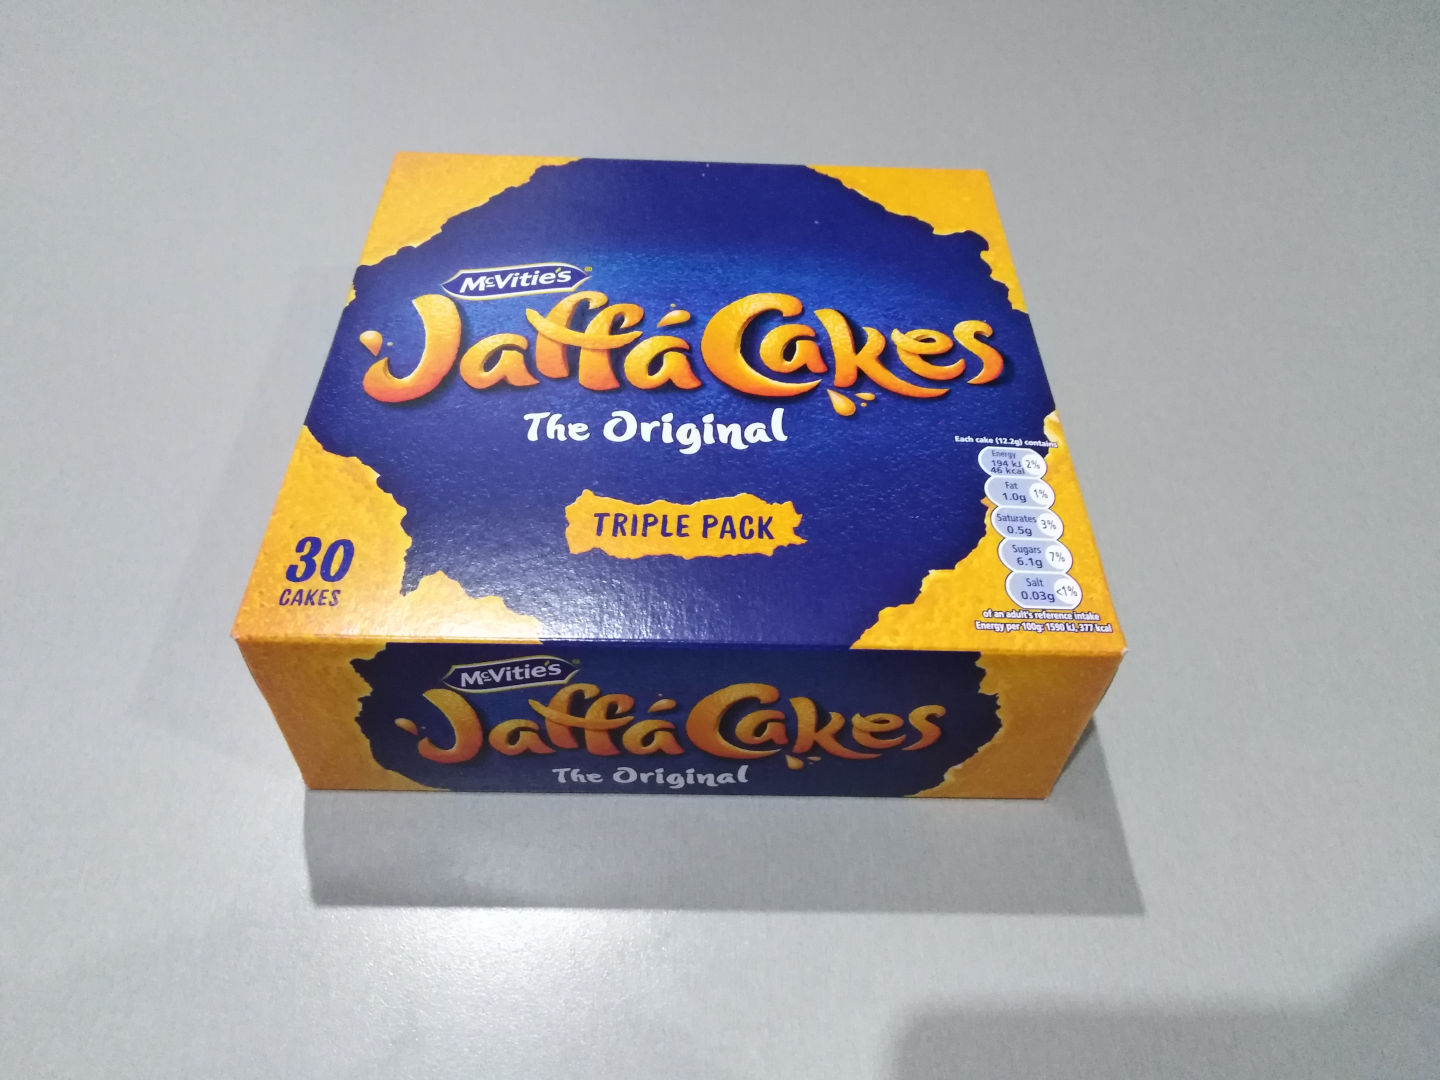 A Pack of JaffaCakes.